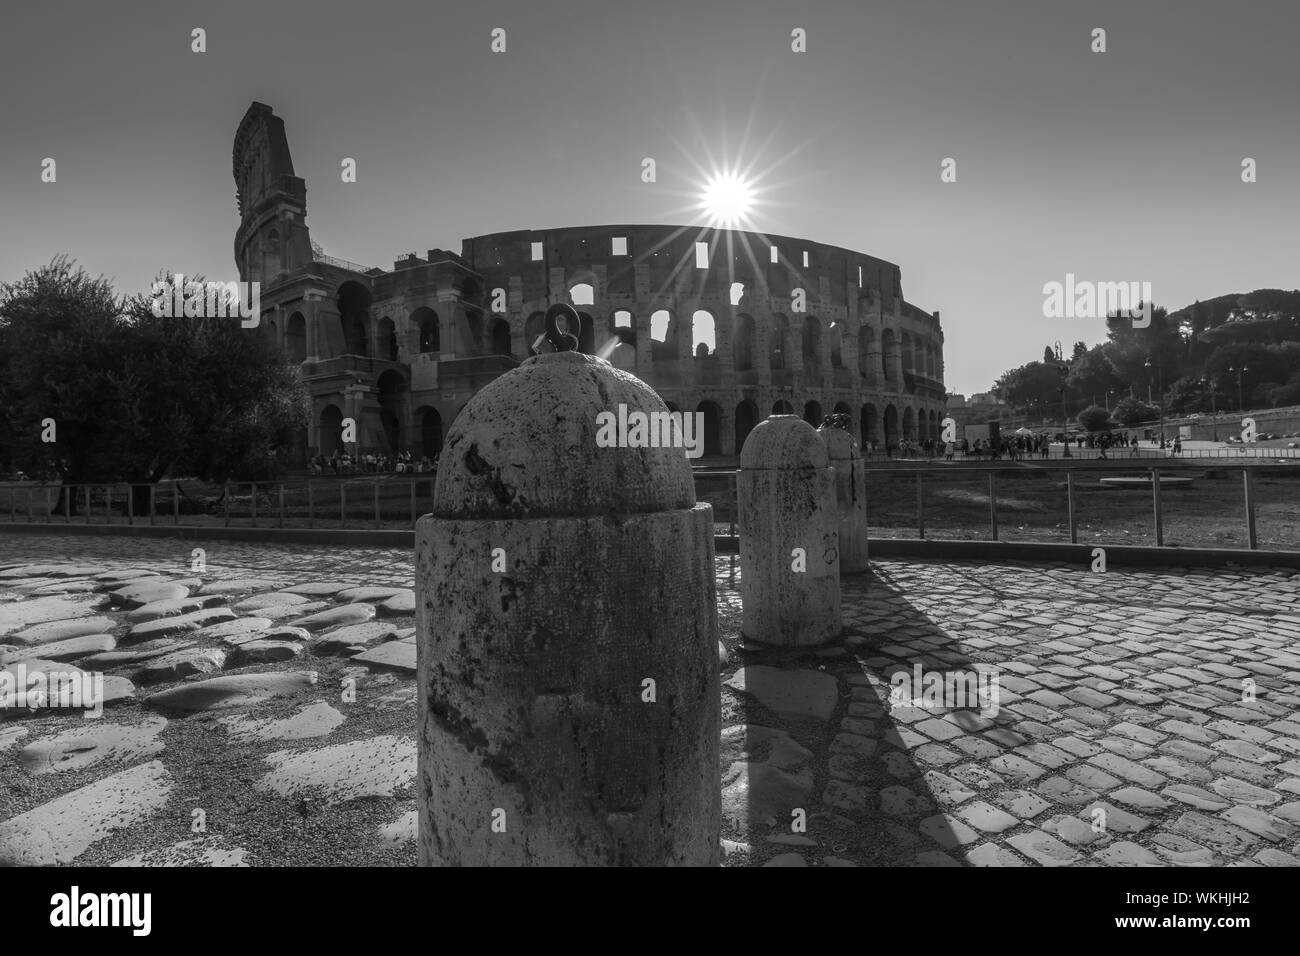 Sunrise in Colosseum on black and white Rome Italy. Stock Photo